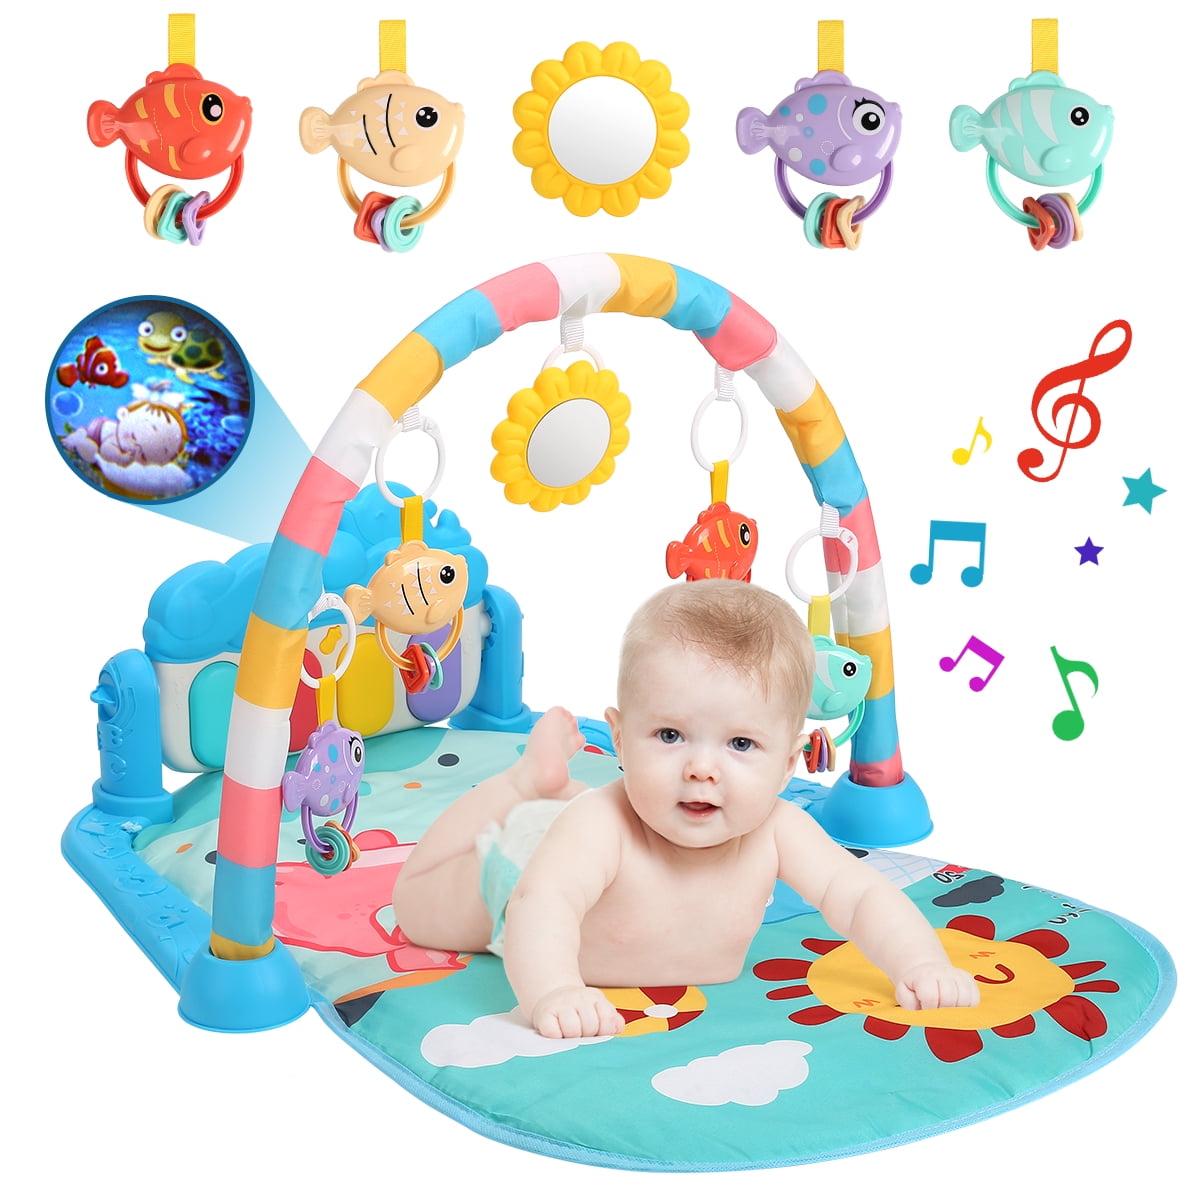 JoyStone Baby Gym Projection Play Mat , Kick and Play Piano Gym, Musical  Activity Center for Infants Toddlers